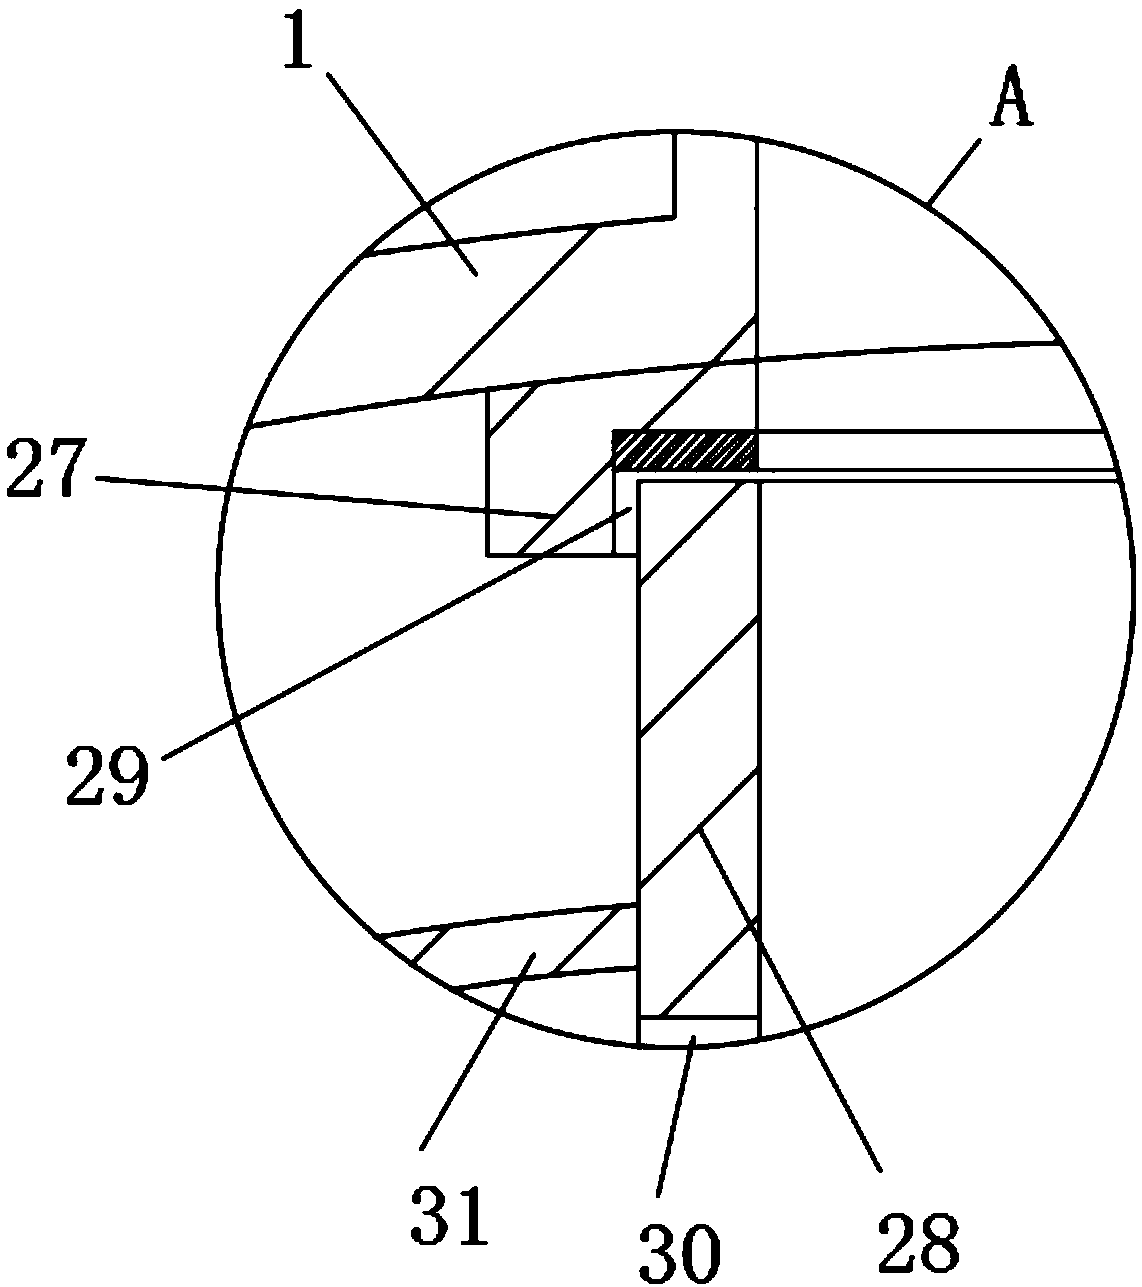 Hair regeneration membrane device and method for using the same